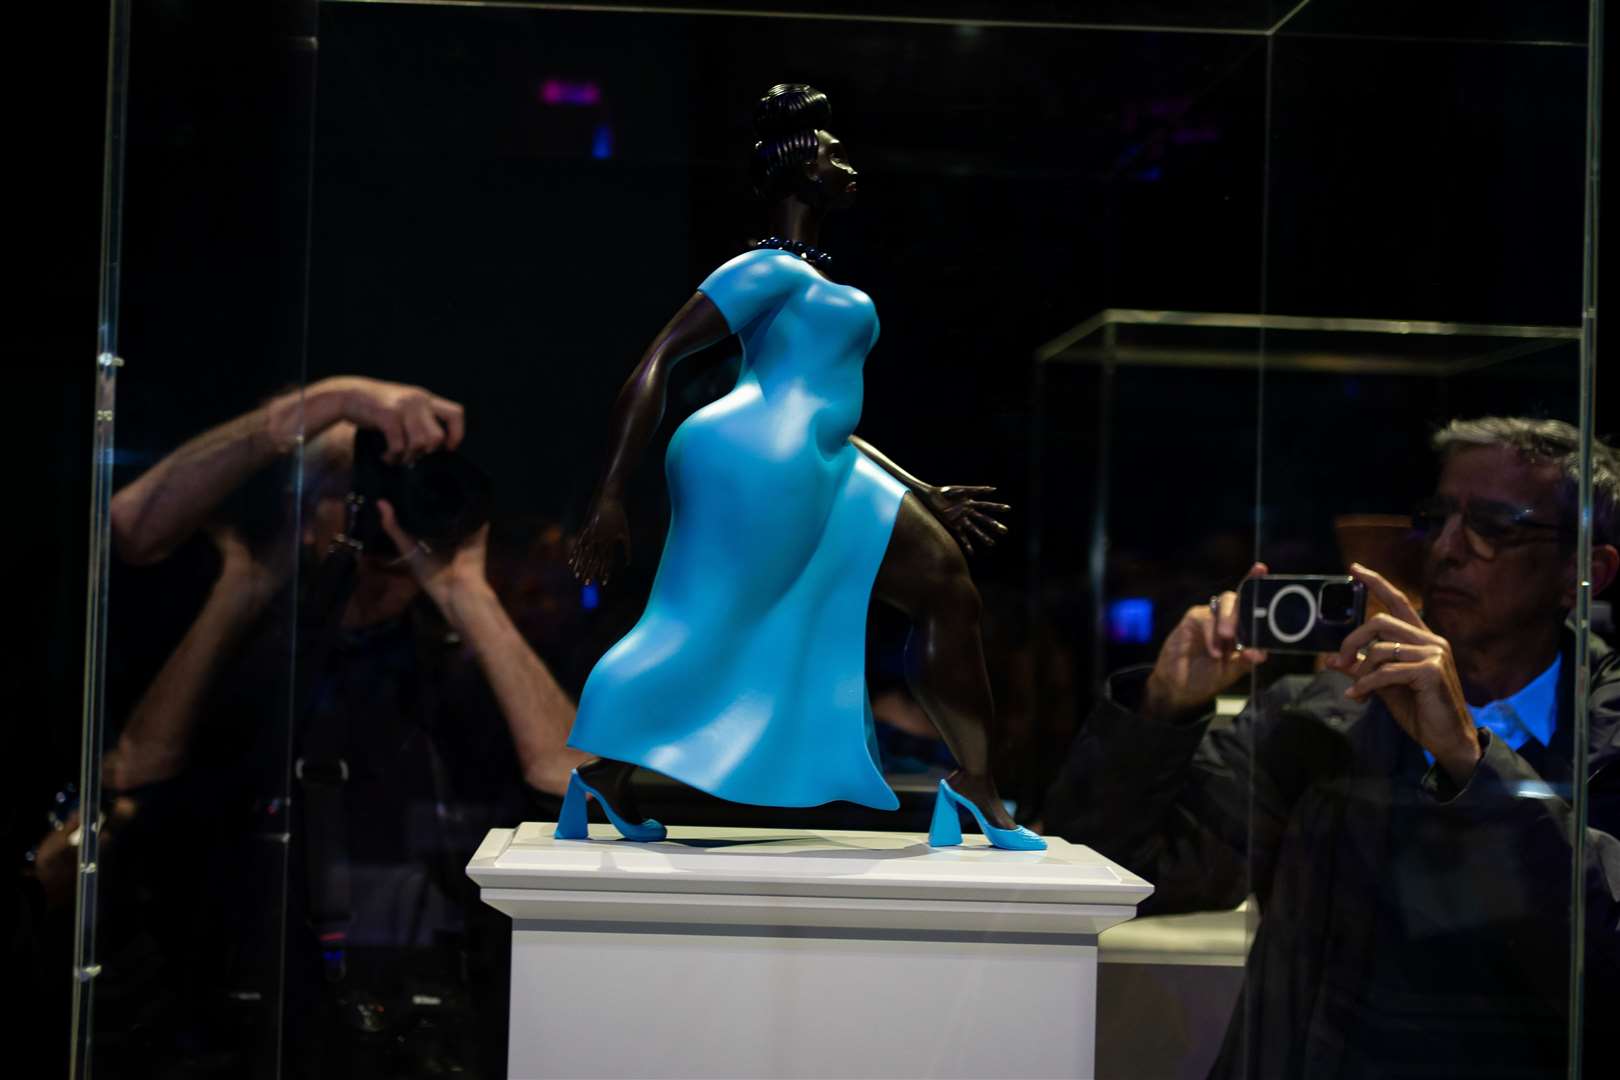 Lady In Blue by Tschabalala Self during the announcement of the shortlisted proposals for the next art commission for Trafalgar Square’s Fourth Plinth, at the National Gallery in London (Aaron Chown/PA)